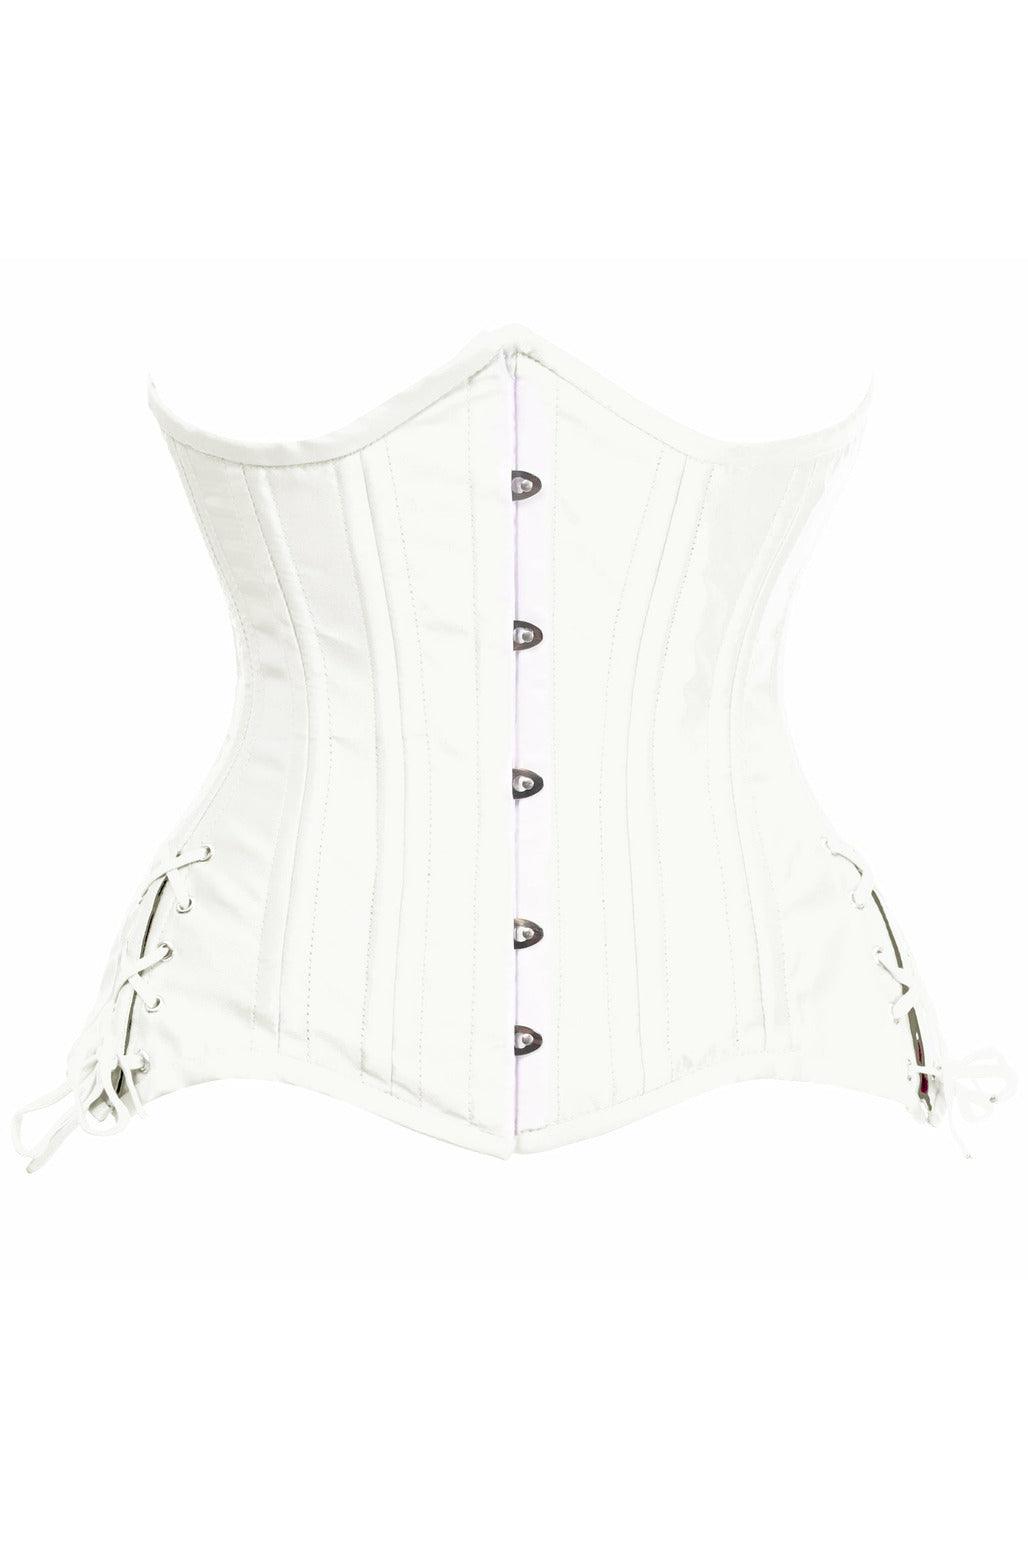 Top Drawer White Satin Double Steel Boned Curvy Cut Waist Cincher Corset w/Lace-Up Sides - Flyclothing LLC